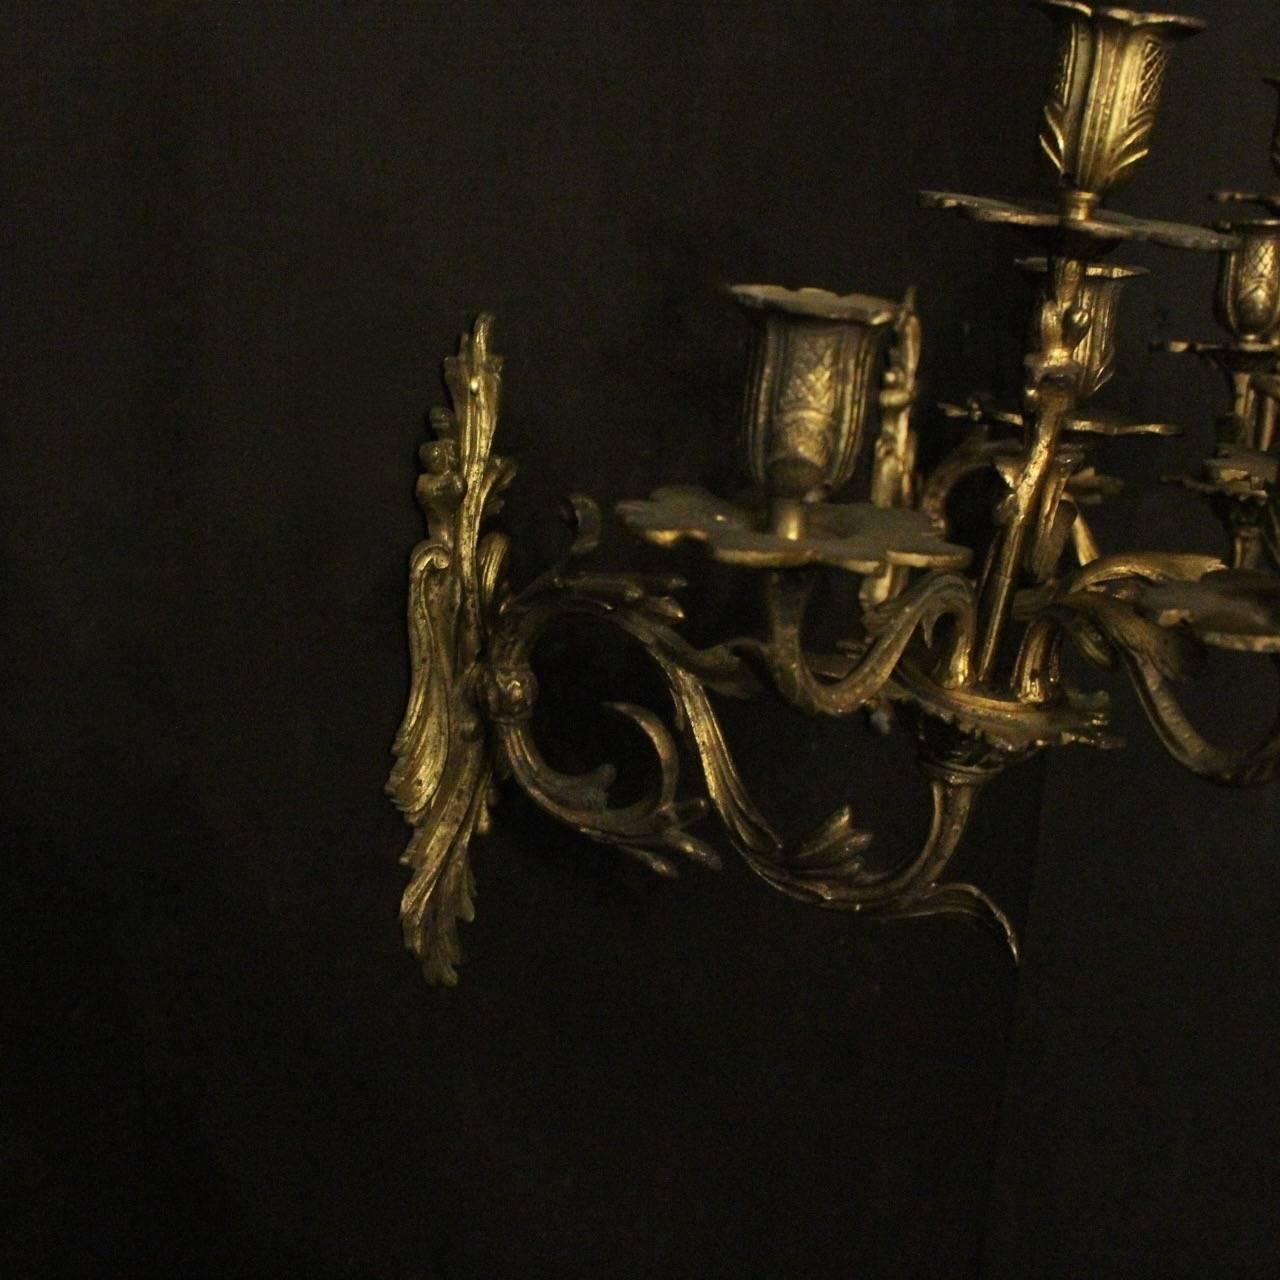 A French pair of gilded bronze five-arm double tiered antique candle wall sconces, the Acanthus leaf scrolling arms with leaf bobeches drip pans and decorative bulbous candle sconces, issuing from an ornately cast Acanthus leaf backplate, original